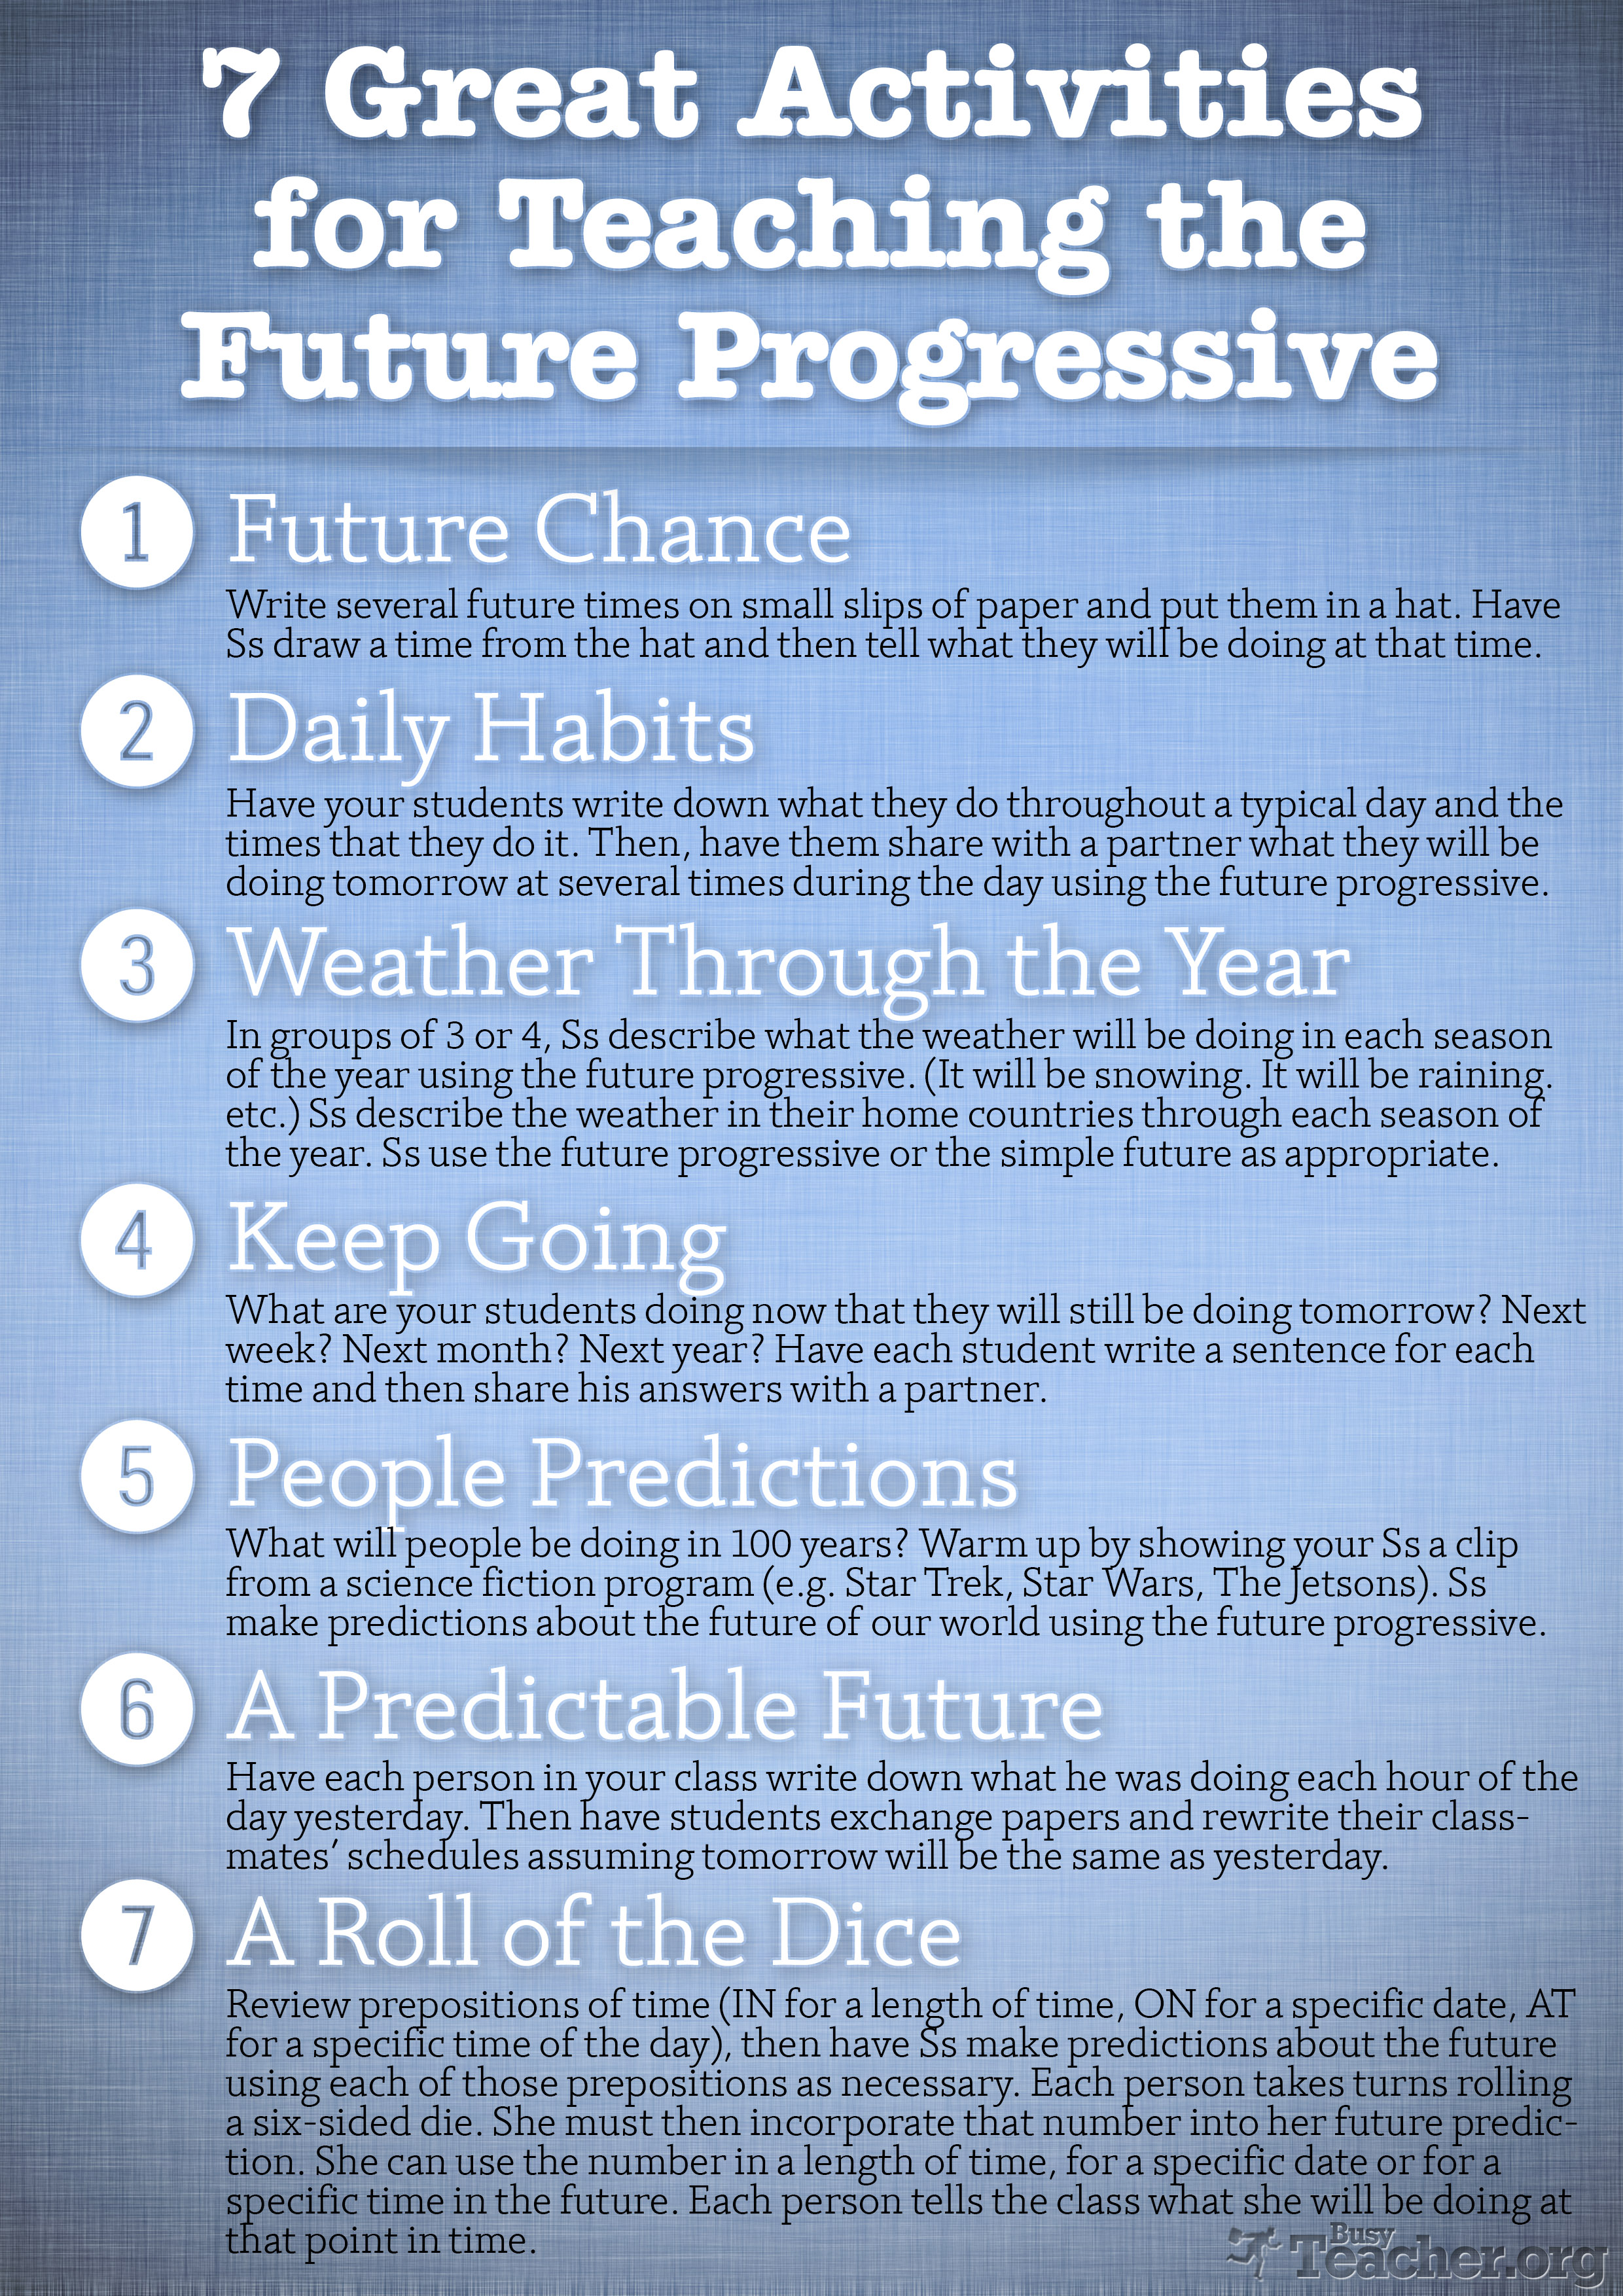 7 Great Activities to Teach the Future Progressive: Poster